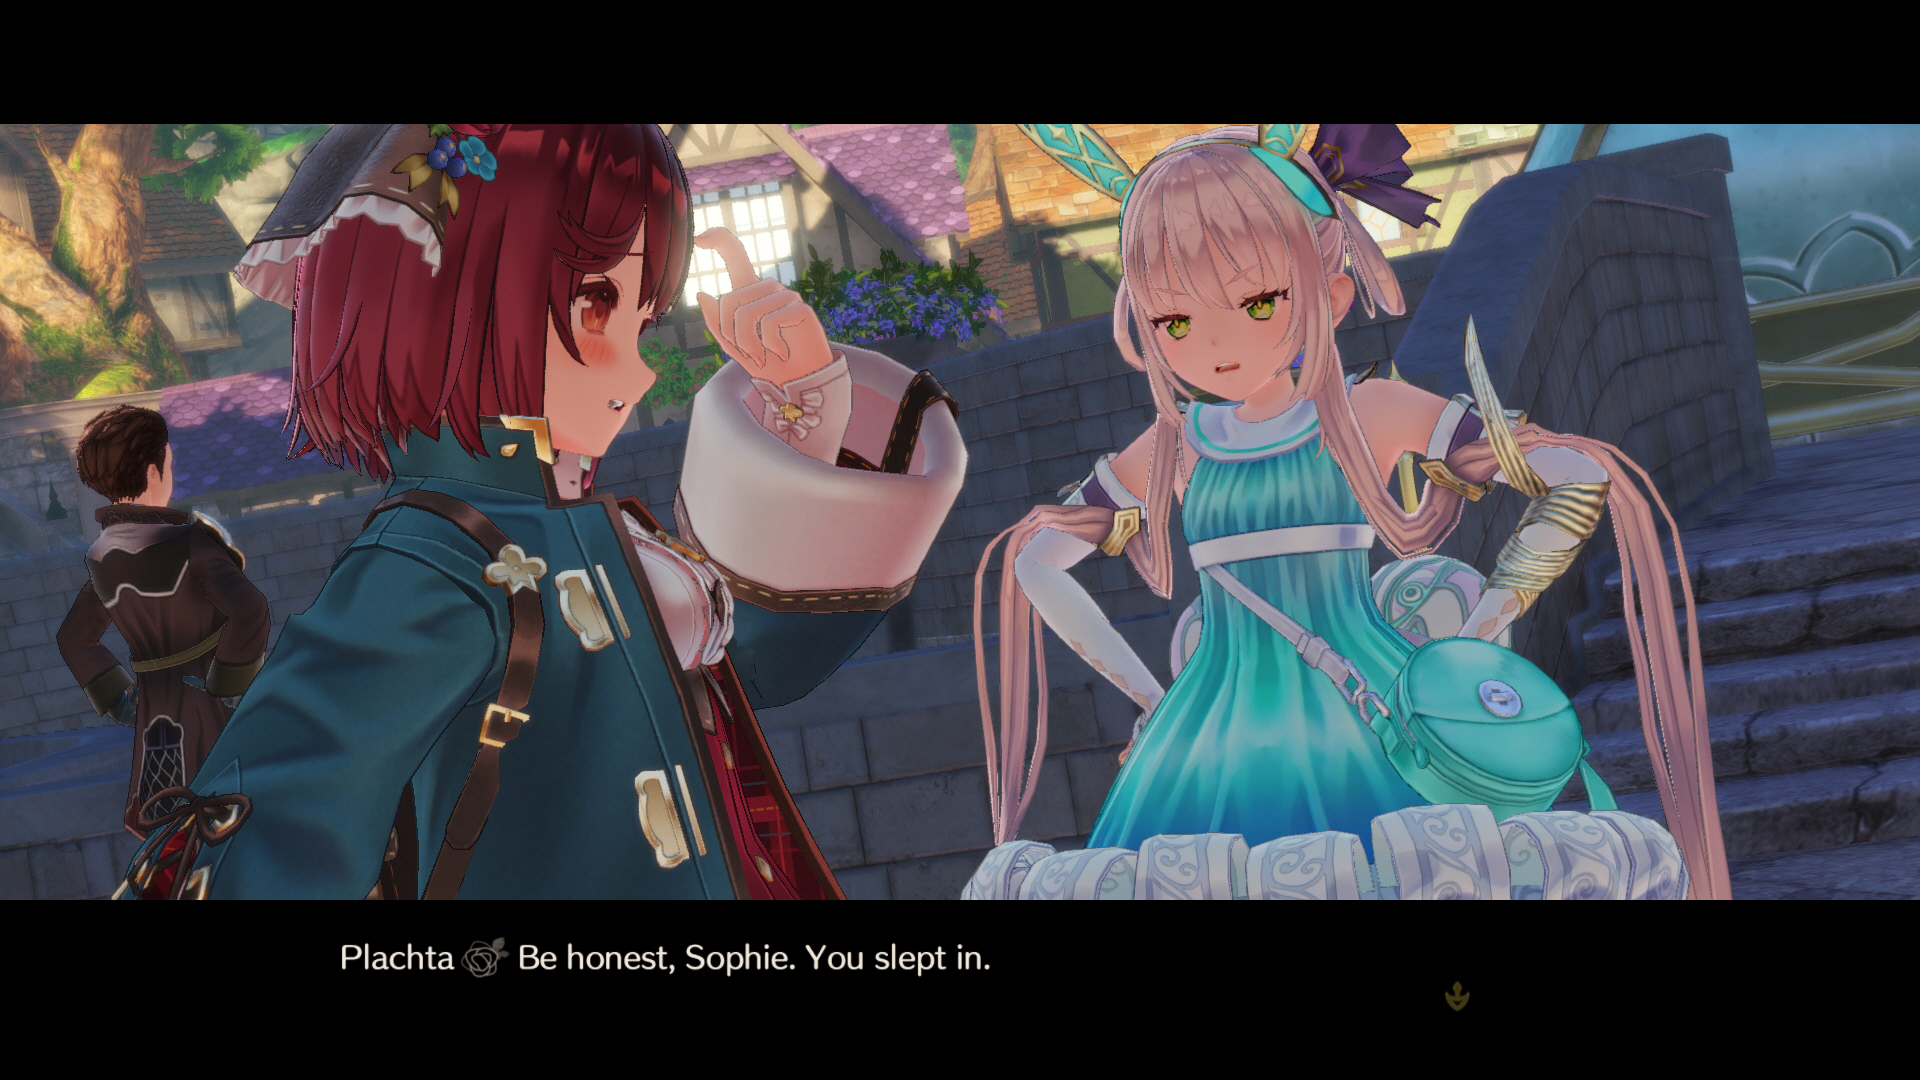 Atelier sophie 2 the alchemist of the mysterious dream screenshot 3 4